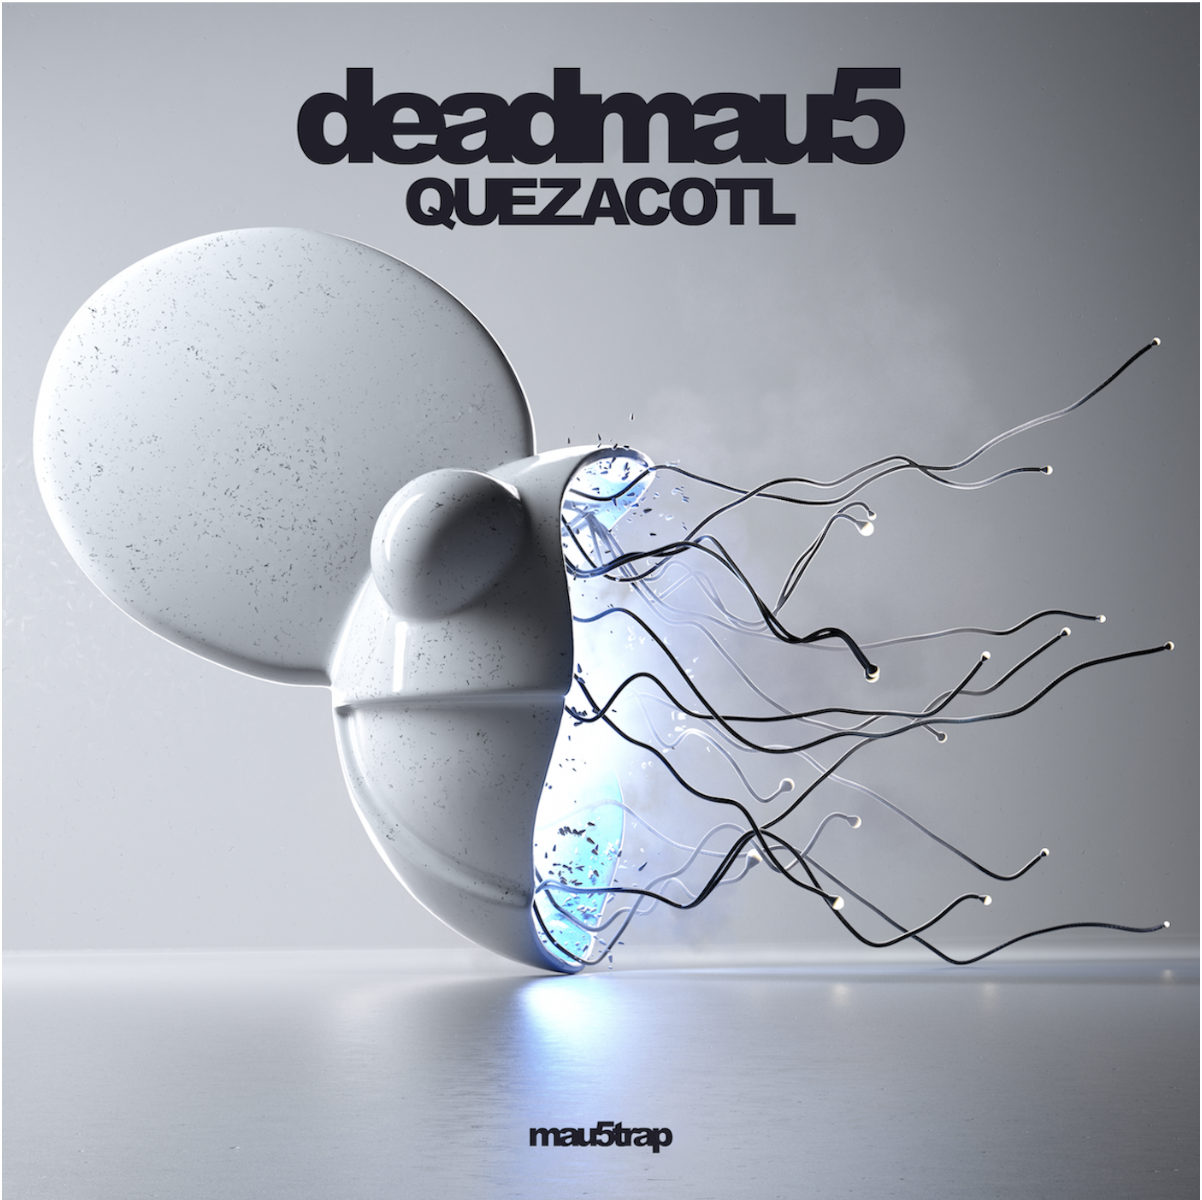 deadmau5 RETURNS TO FORM WITH NEW SINGLE “QUEZACOTL” OUT NOW ON mau5trap